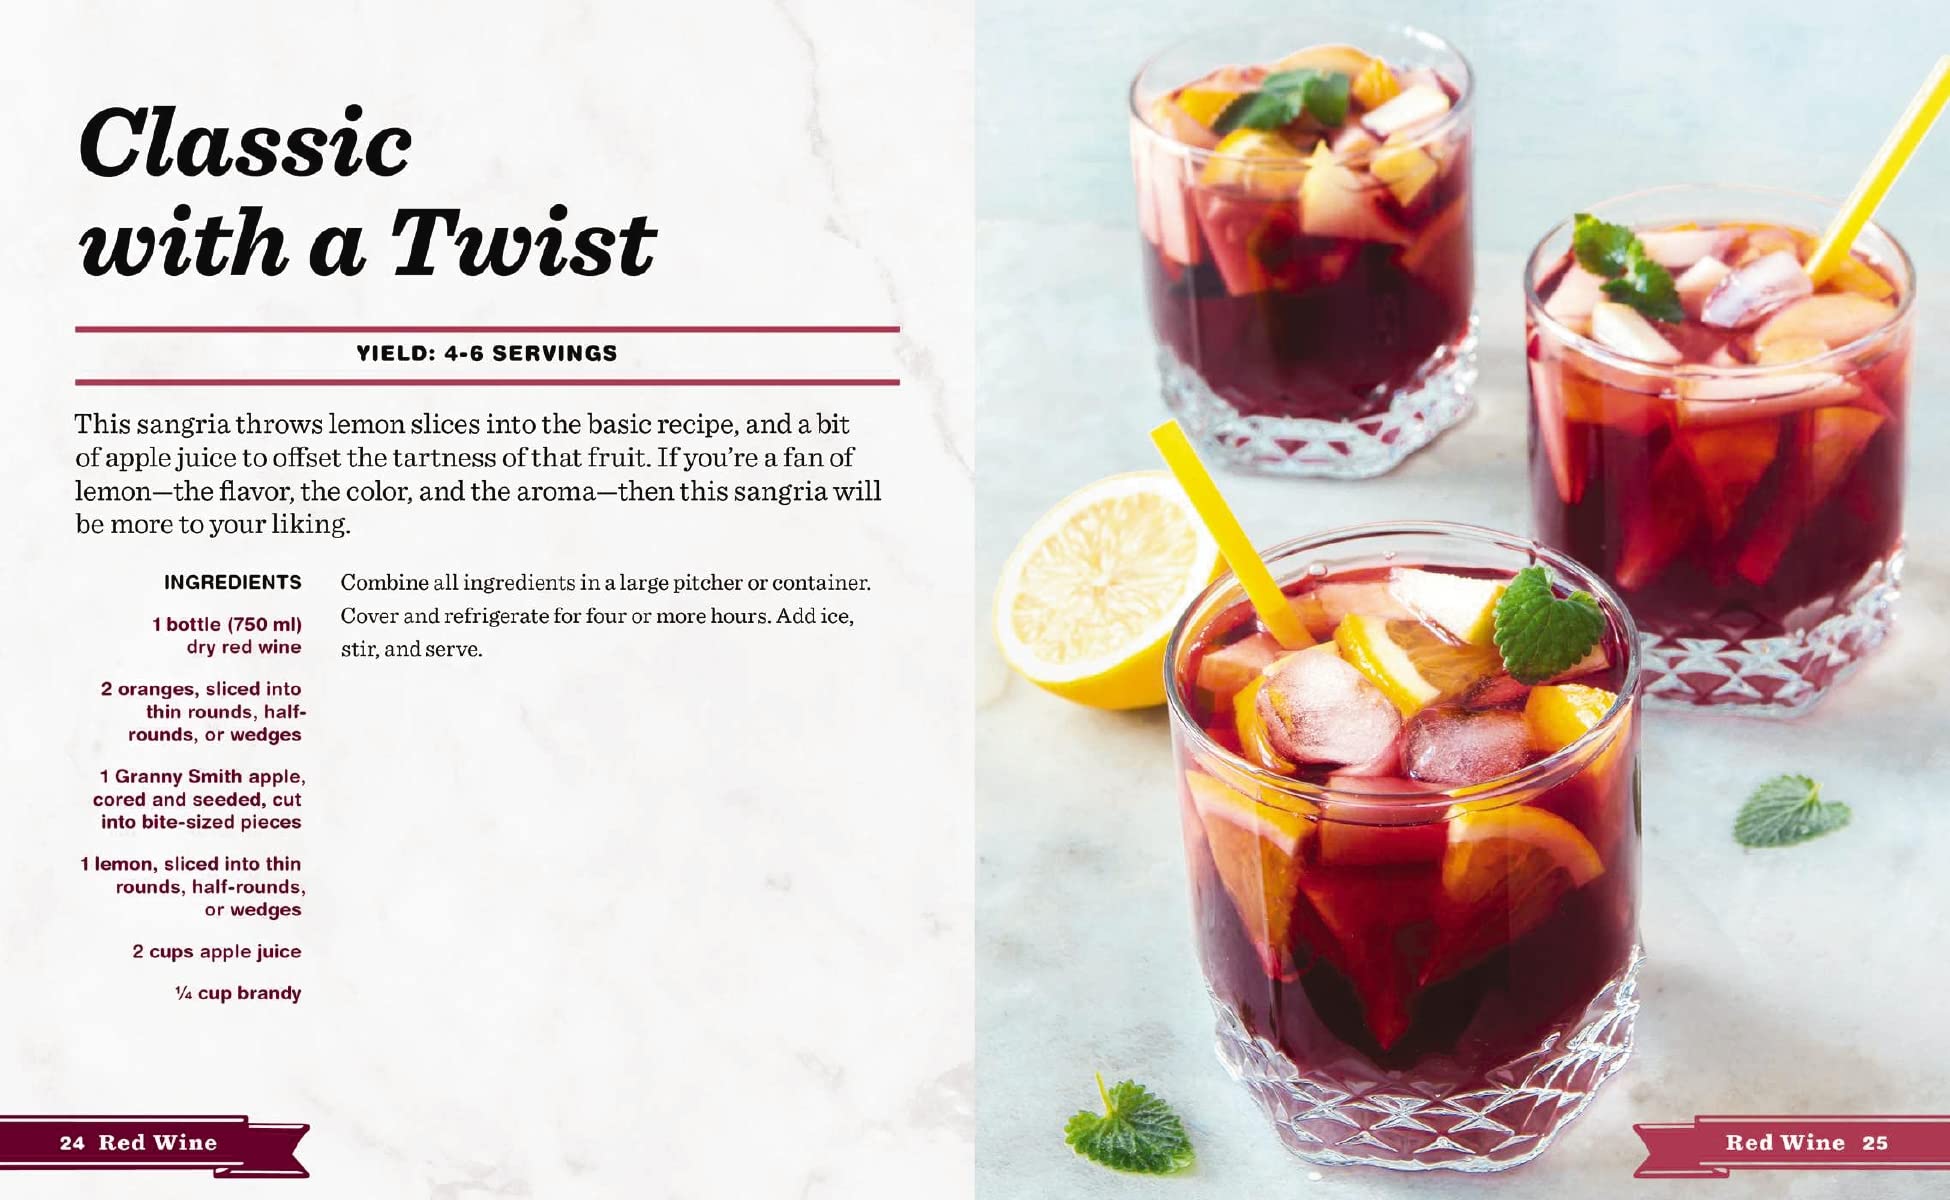 Seasonal Sangria: 101 Delicious Recipes to Enjoy All Year Long! (Wine and Spirits Recipes, Cookbooks for Entertaining, Drinks and Beverages, Seasonal Books) (The Art of Entertaining)